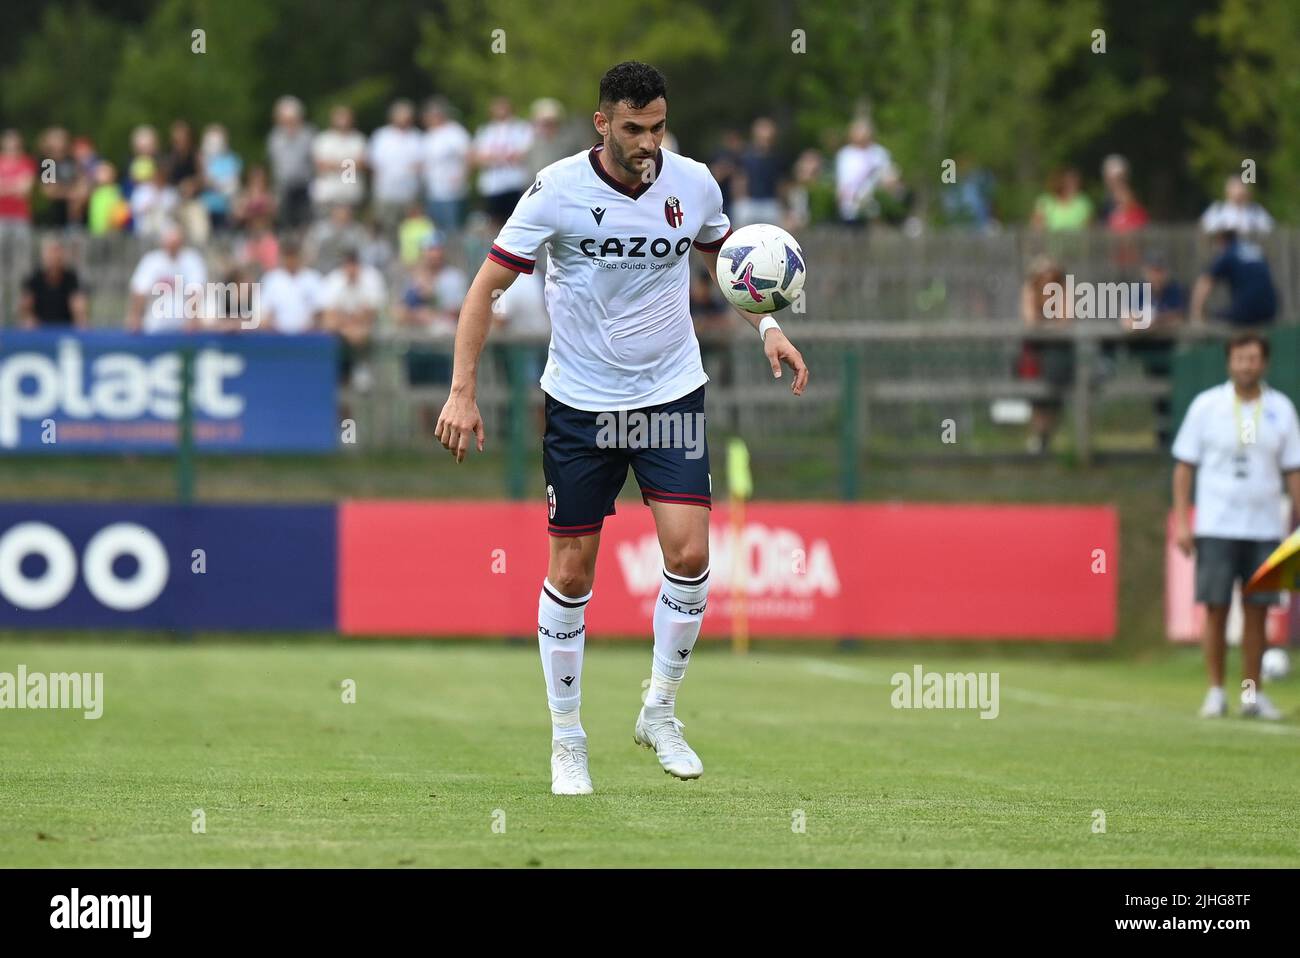 Stadio Comunale, Pinzolo, Italy, July 17, 2022, Charalampos Lykogiannis (bologna)  during  Bologna fC vs Castiglione - friendly football match Stock Photo